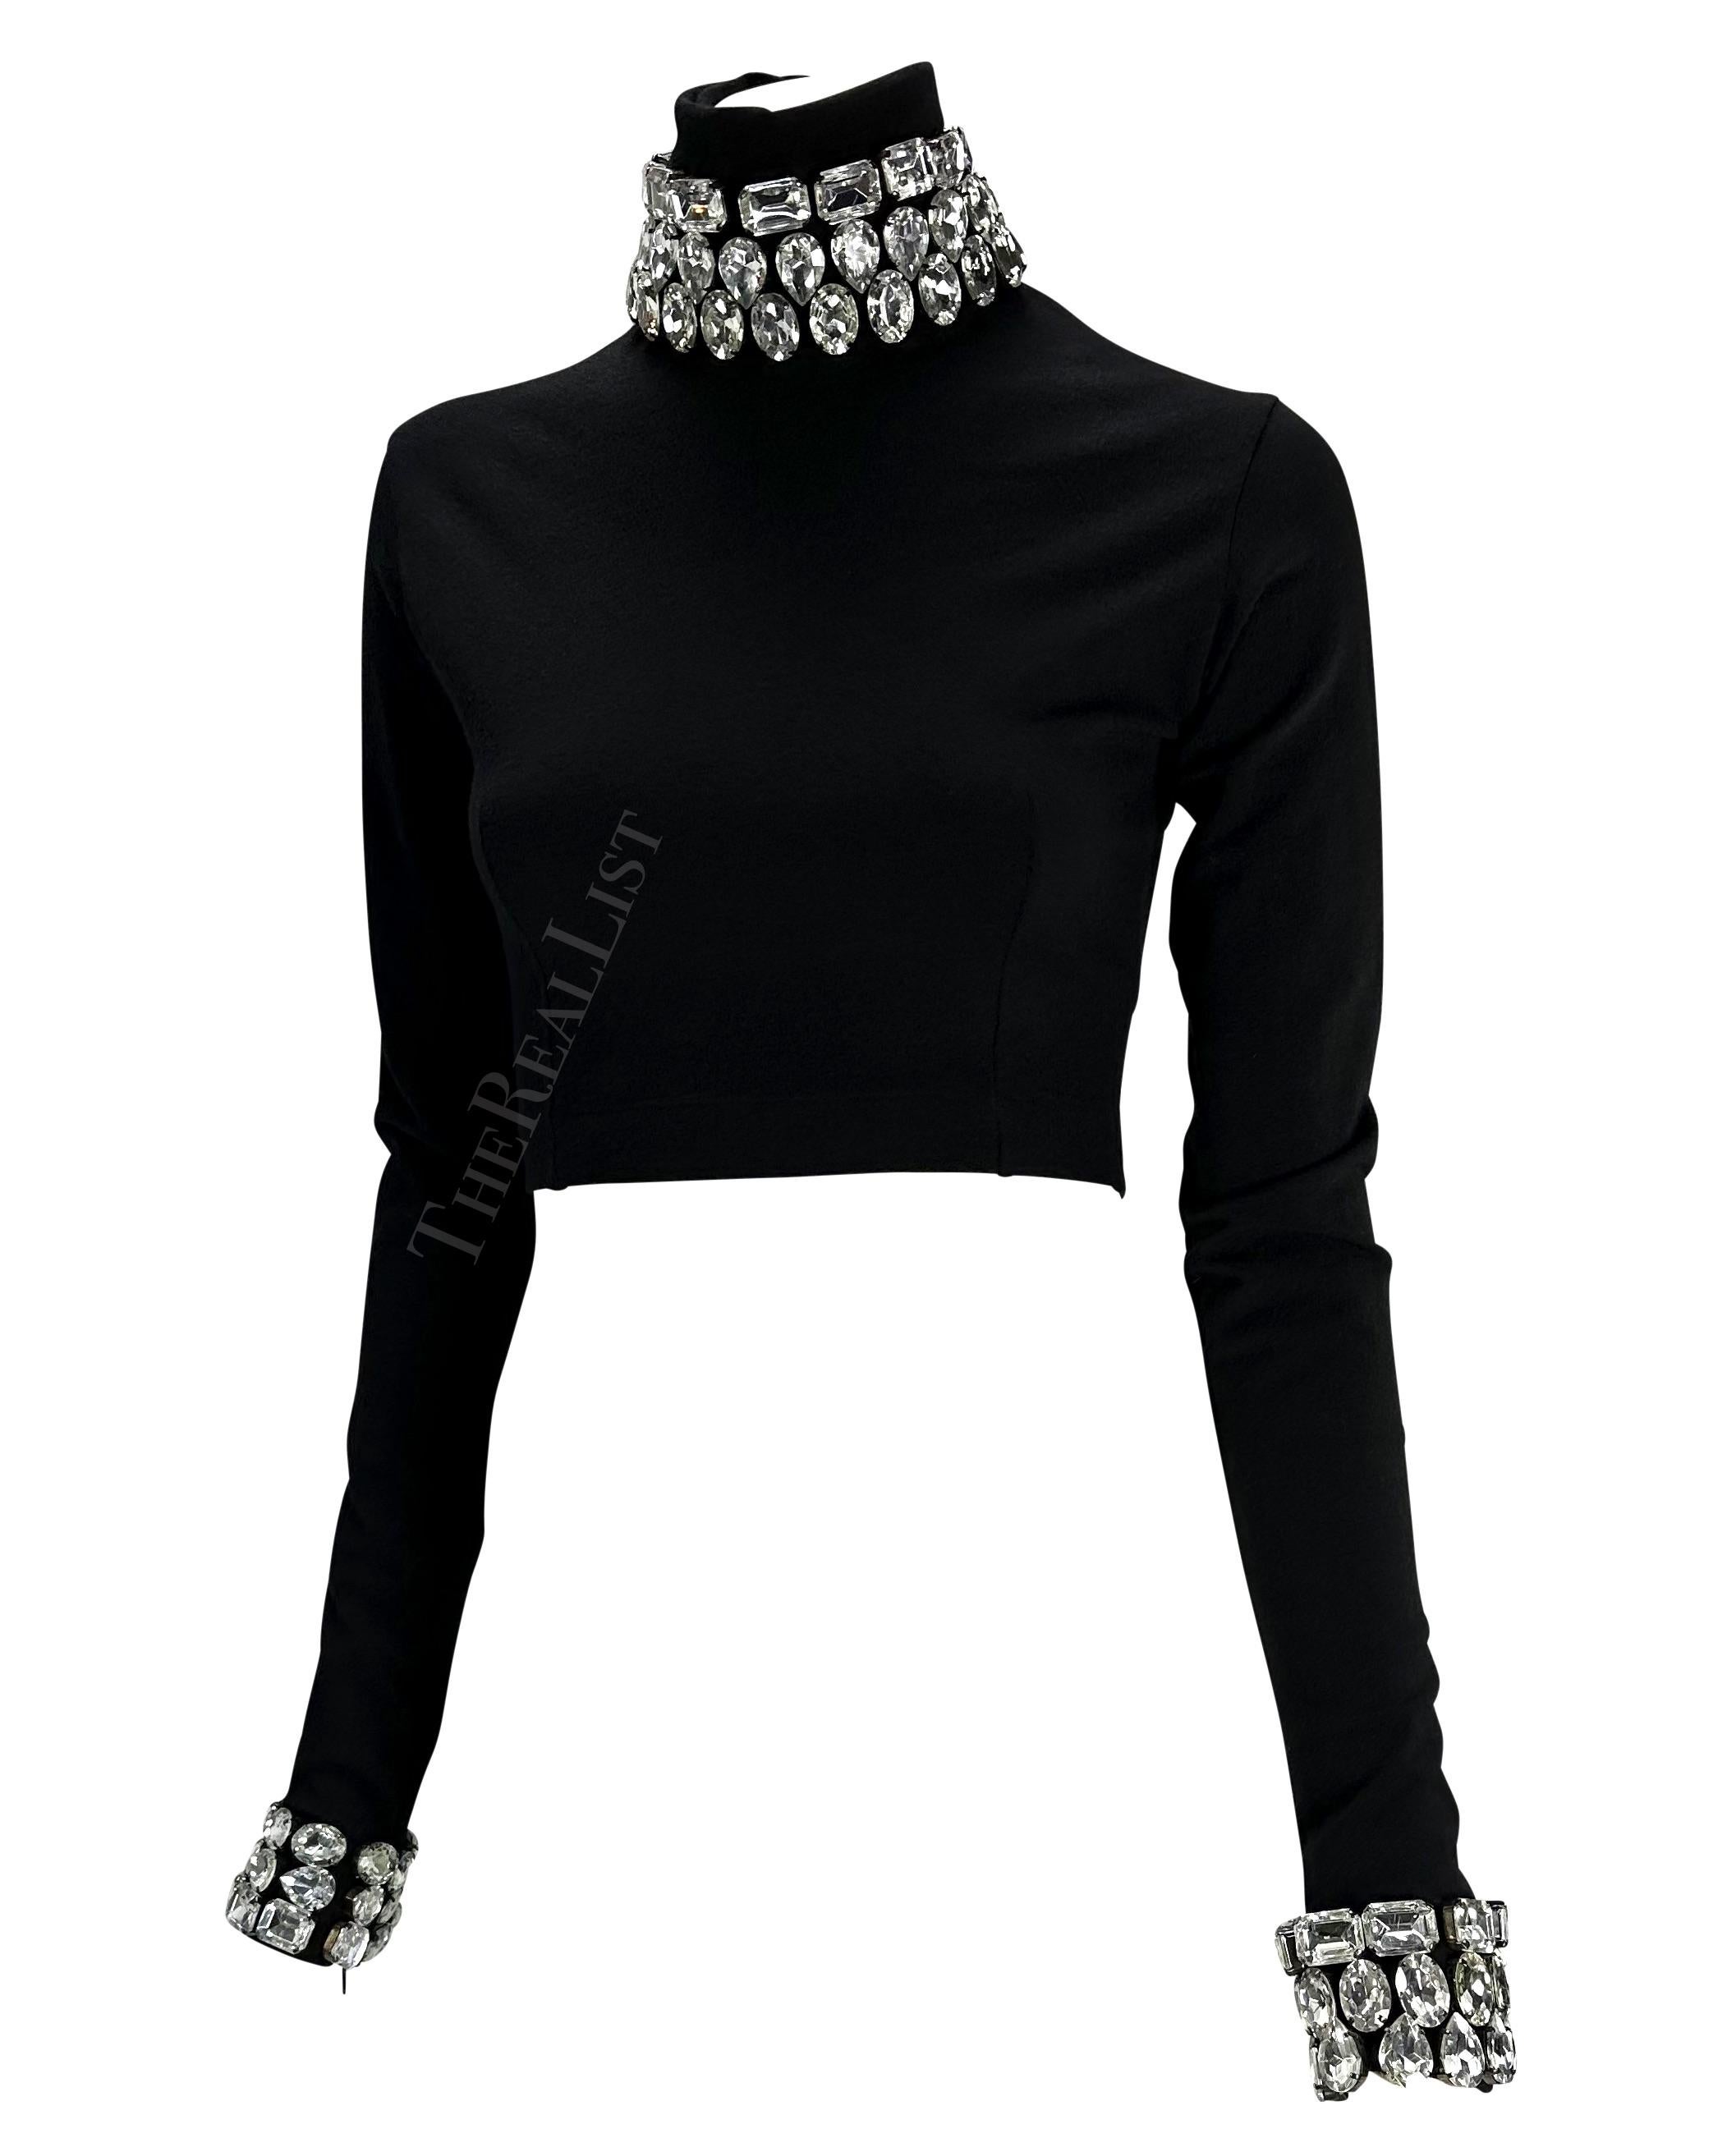 Women's F/W 1991 Dolce & Gabbana Crystal Rhinestone Accented Black Cropped Turtleneck For Sale